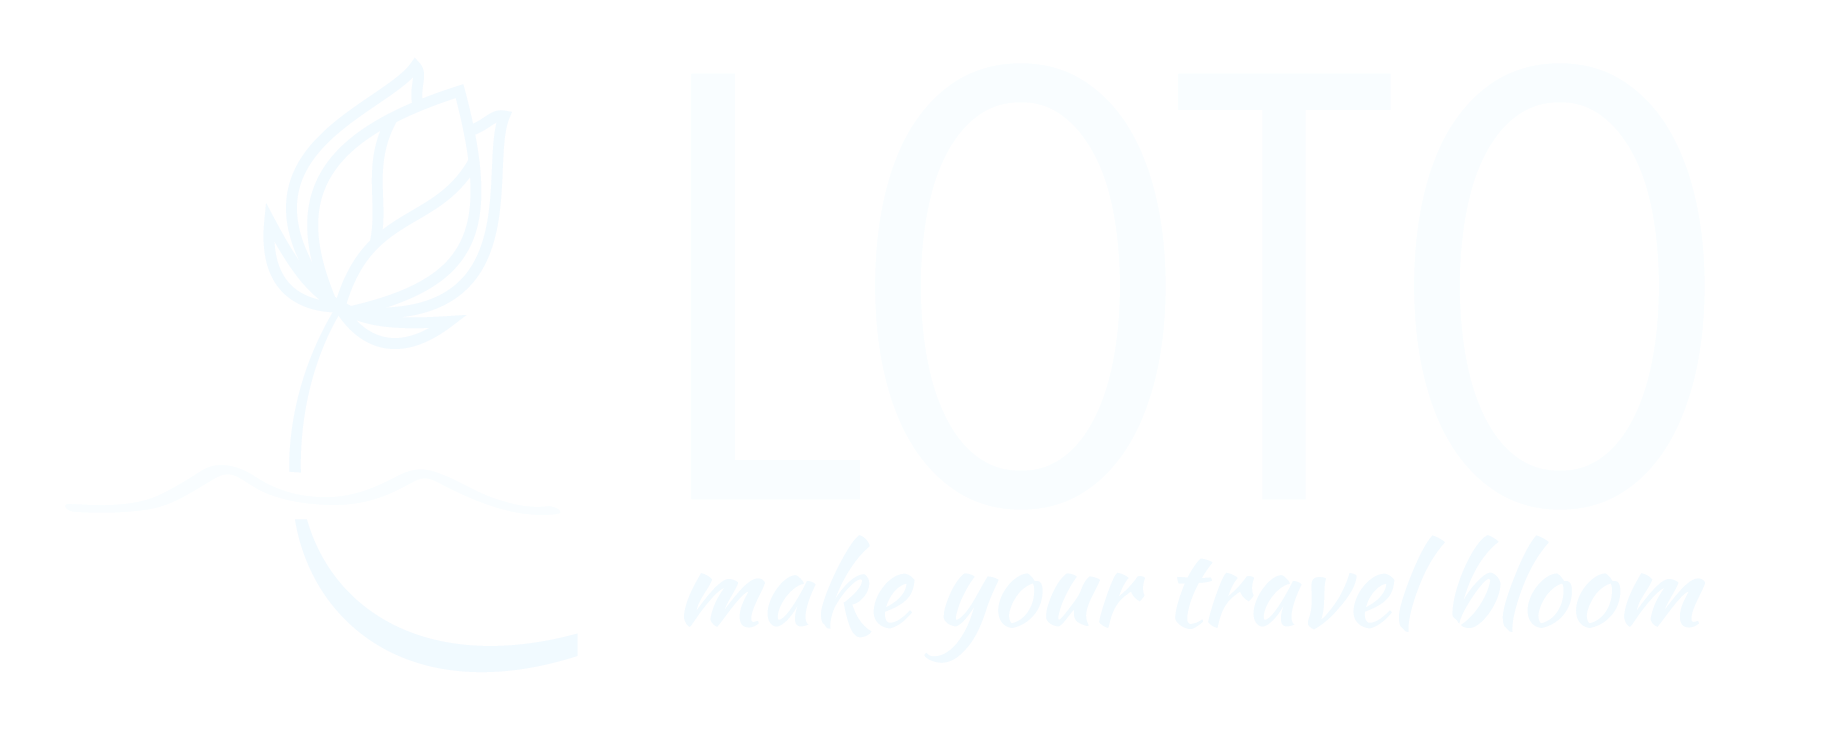 LOTO - Make your travel bloom